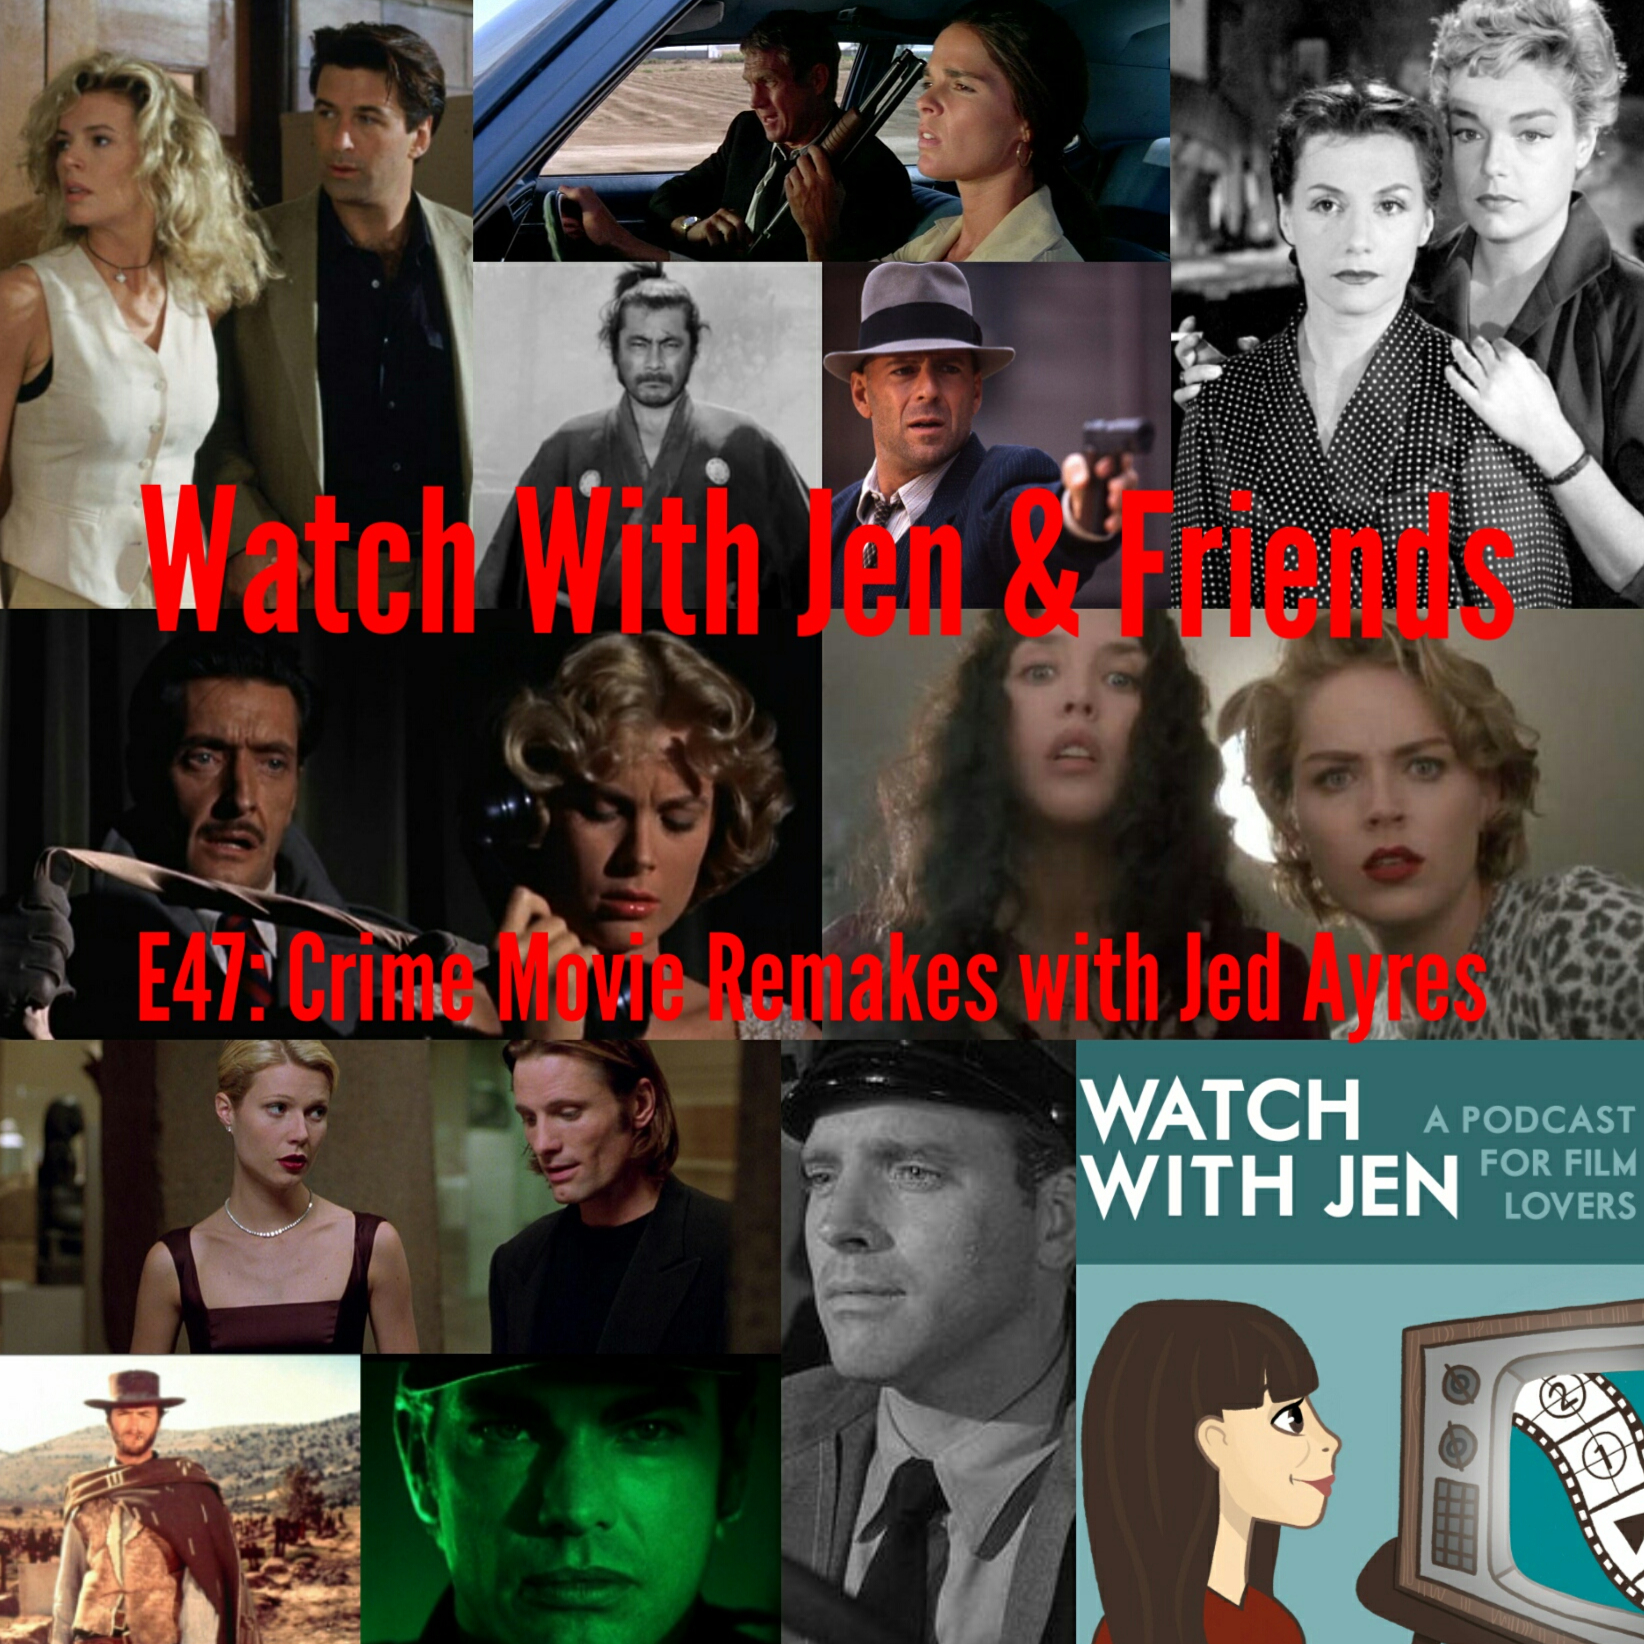 Watch With Jen & Friends: Episode 47 - Crime Movie Remakes with Jed Ayres